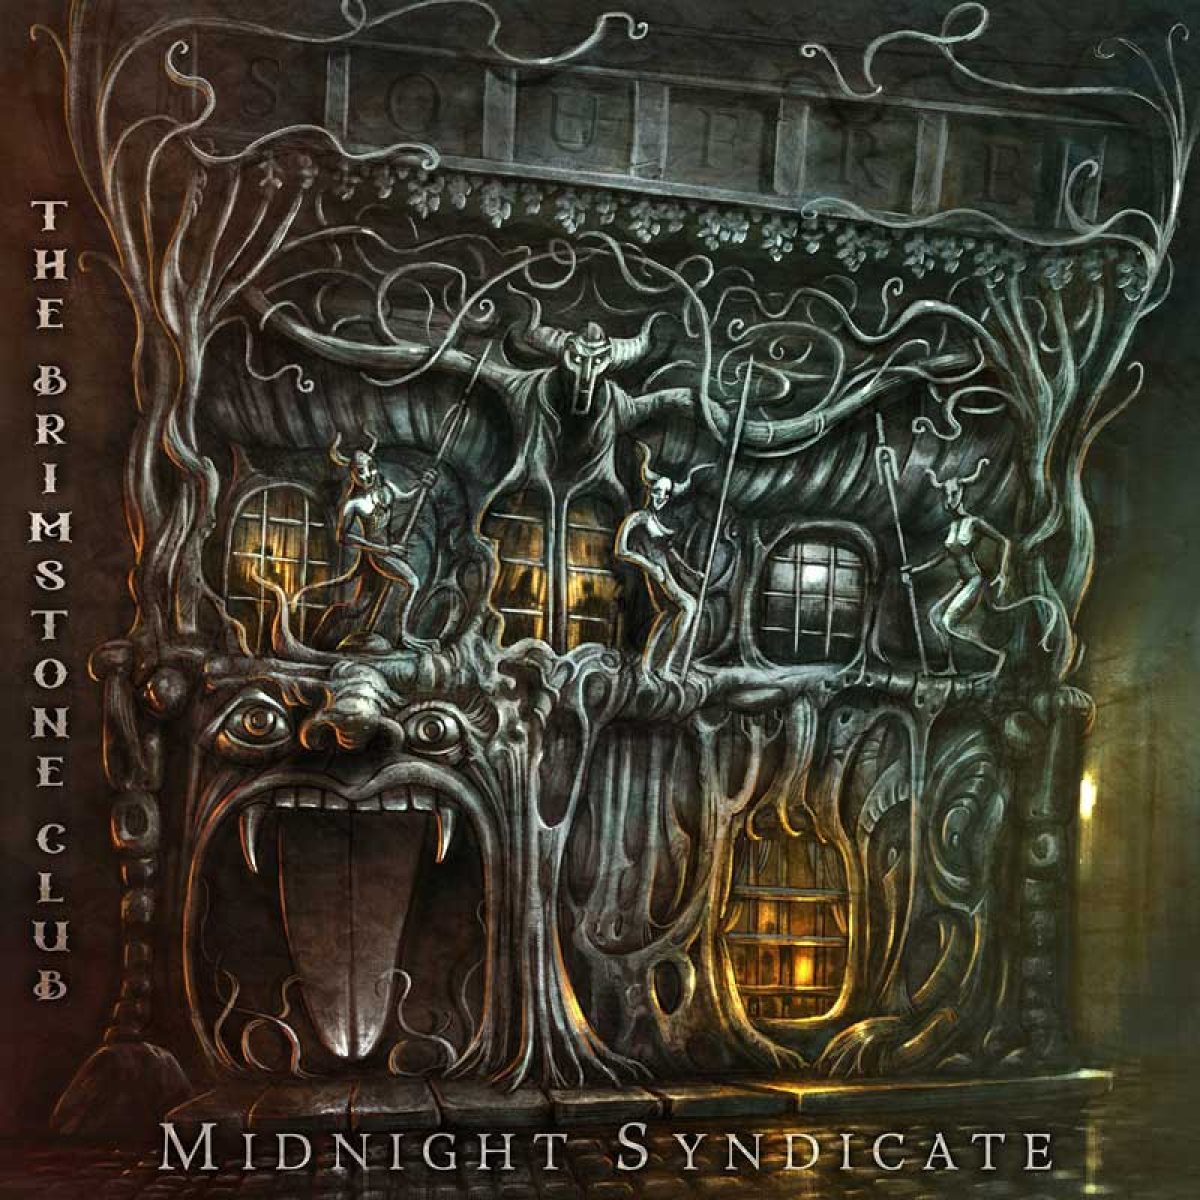 CDs Archives - Midnight Syndicate Halloween Music - Gothic Horror 